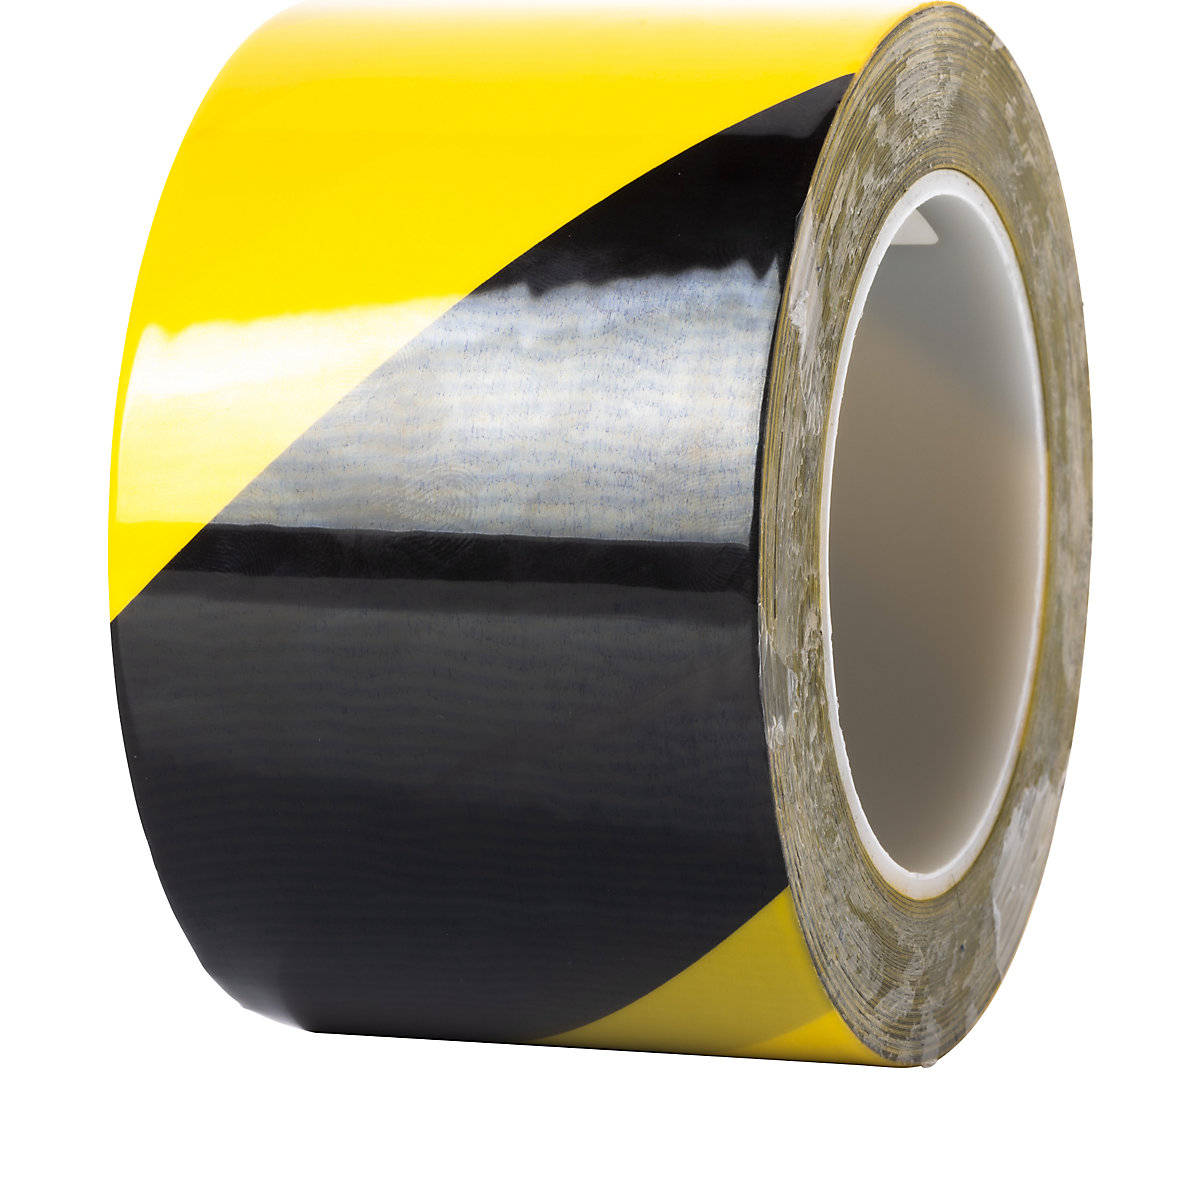 Floor marking tape, extra strong – Ampere, width 50 mm, thickness 0.2 mm, yellow/black-2